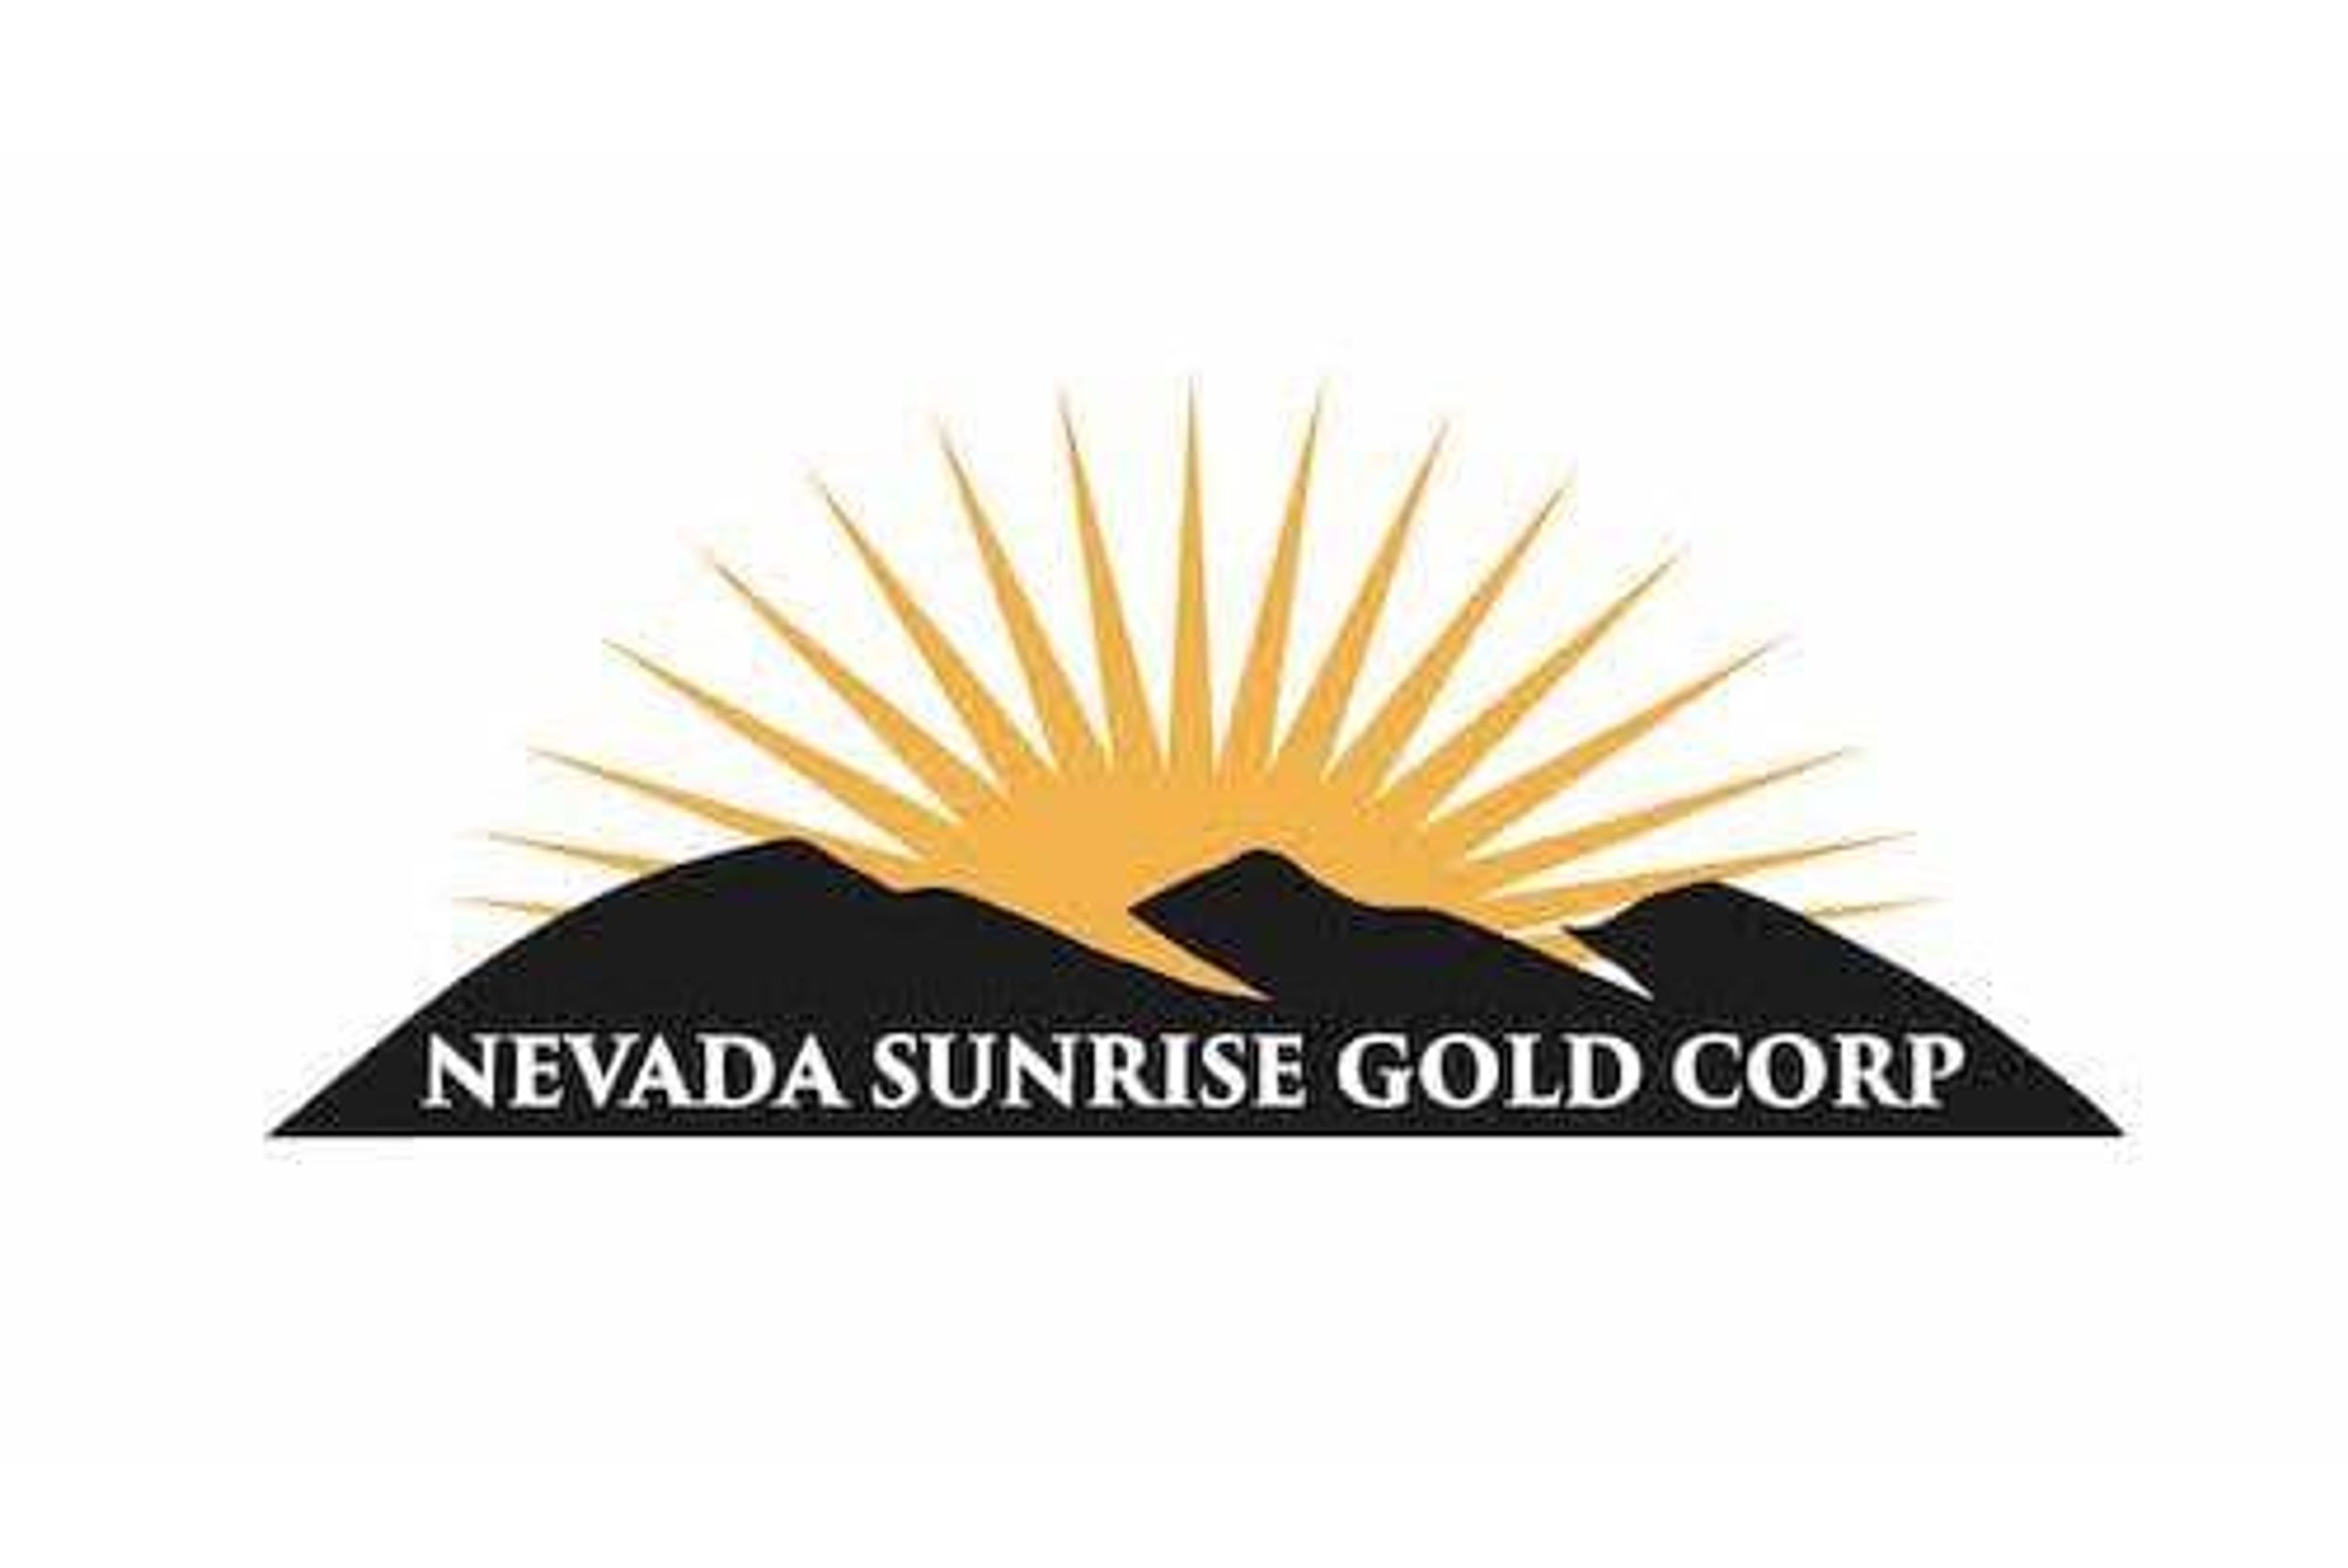 Nevada Sunrise Receives Additional Lithium Analyses - GEM22-01 Mineralized Intersection Improves to 1,203 ppm Lithium over 580 Feet in New Lithium Discovery at the Gemini Lithium Project, Nevada